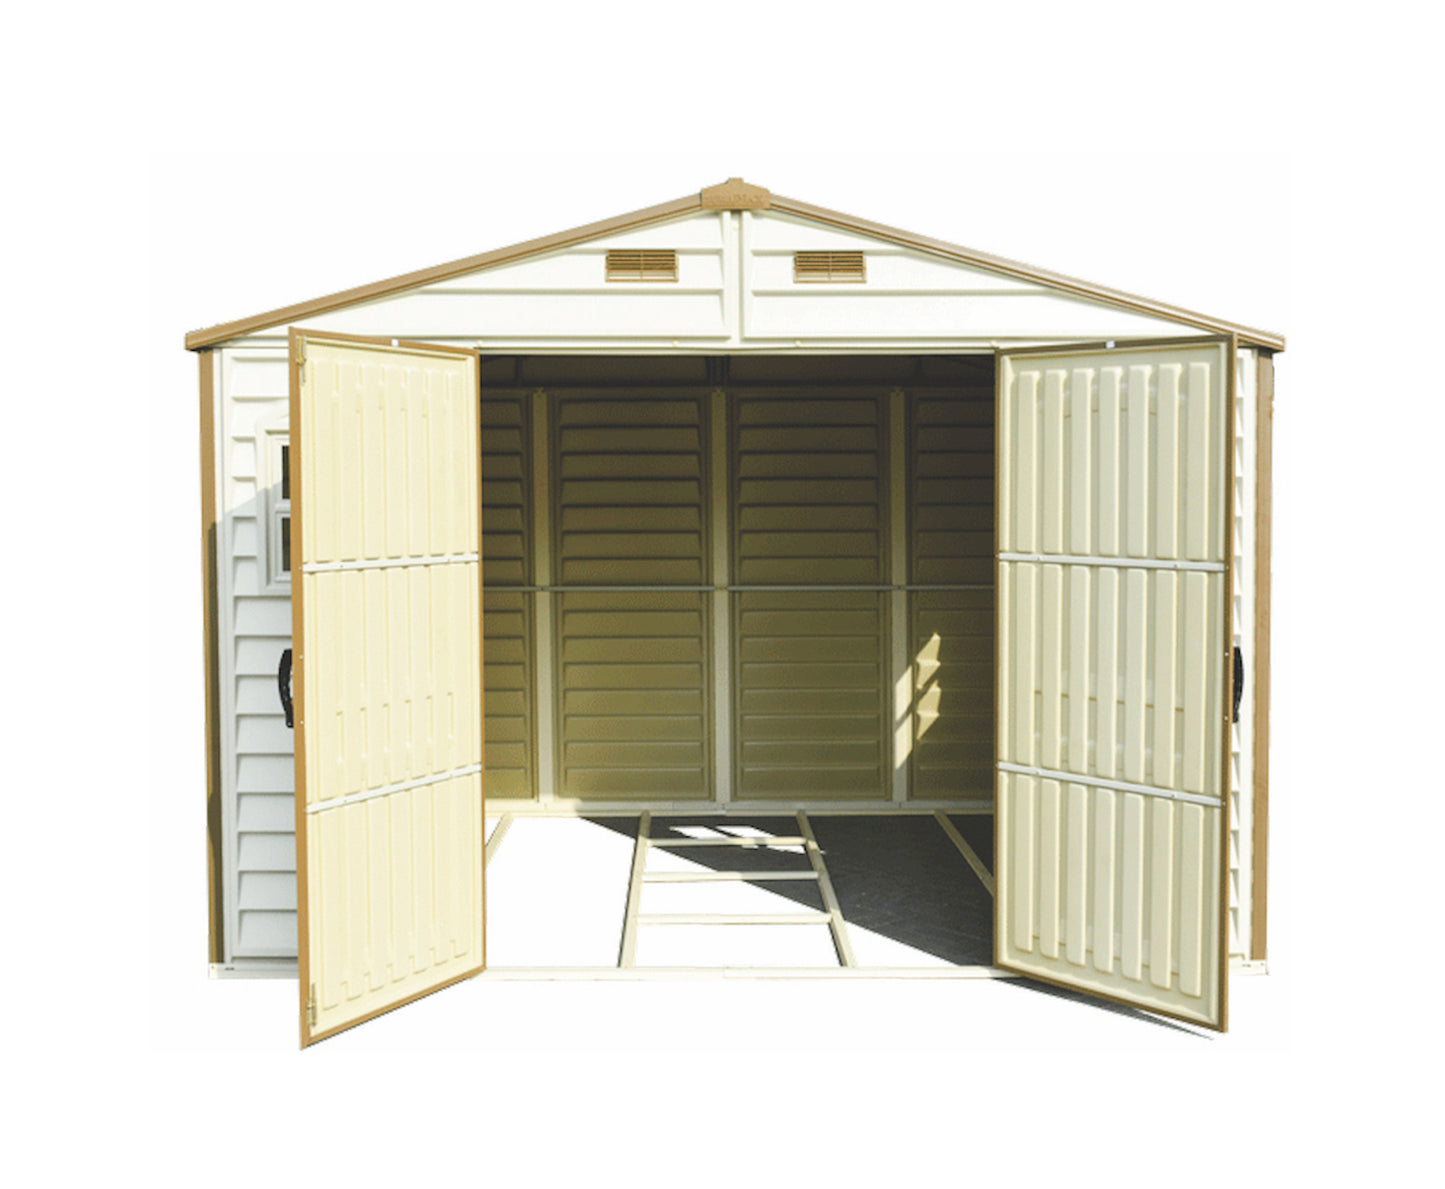 Duramax woodside, plastic storage shed for garden, 3.19 x 2.40 m with foundation kit.